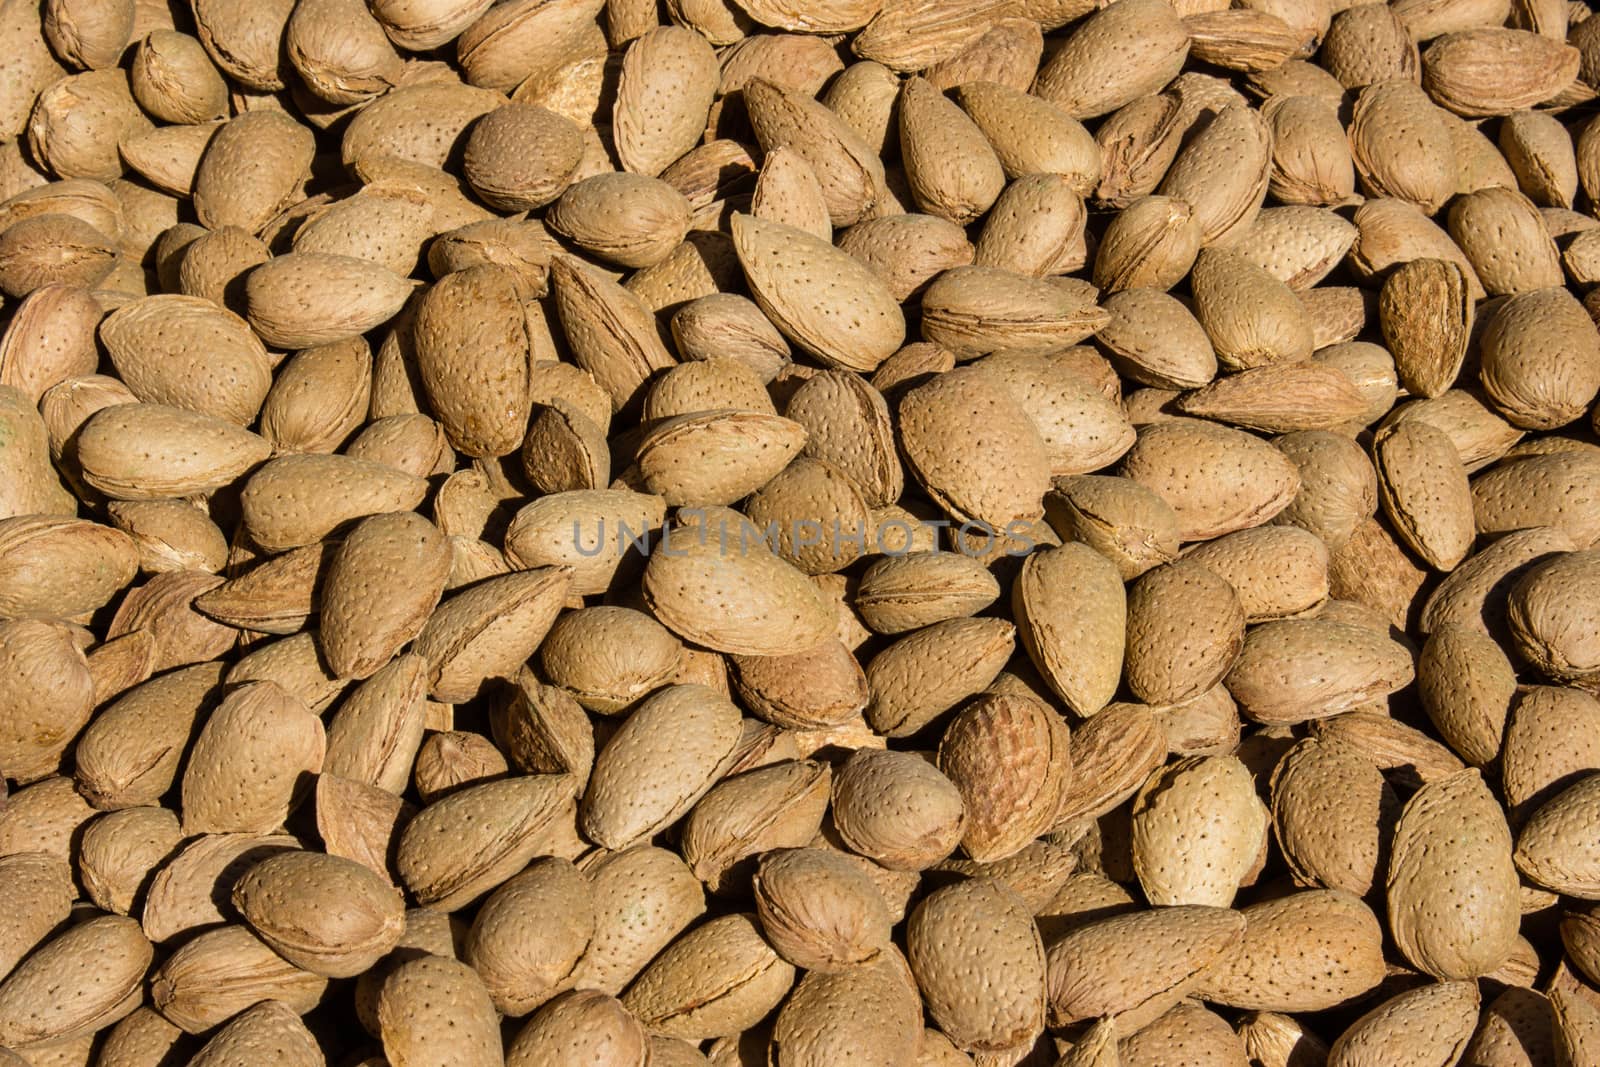 Almonds to the fruit market